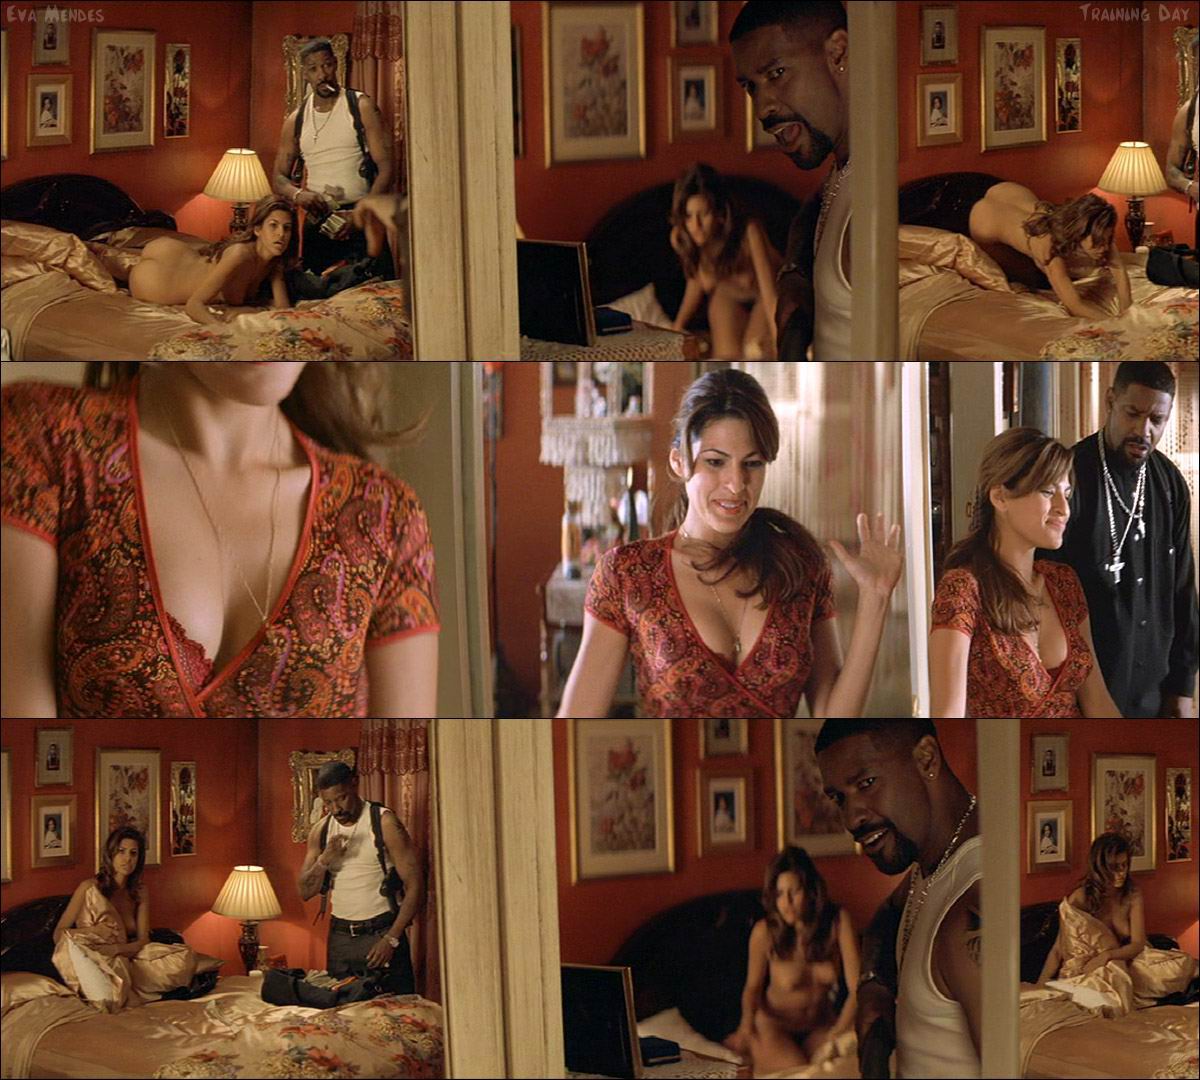 Eva mendes nude in traing day